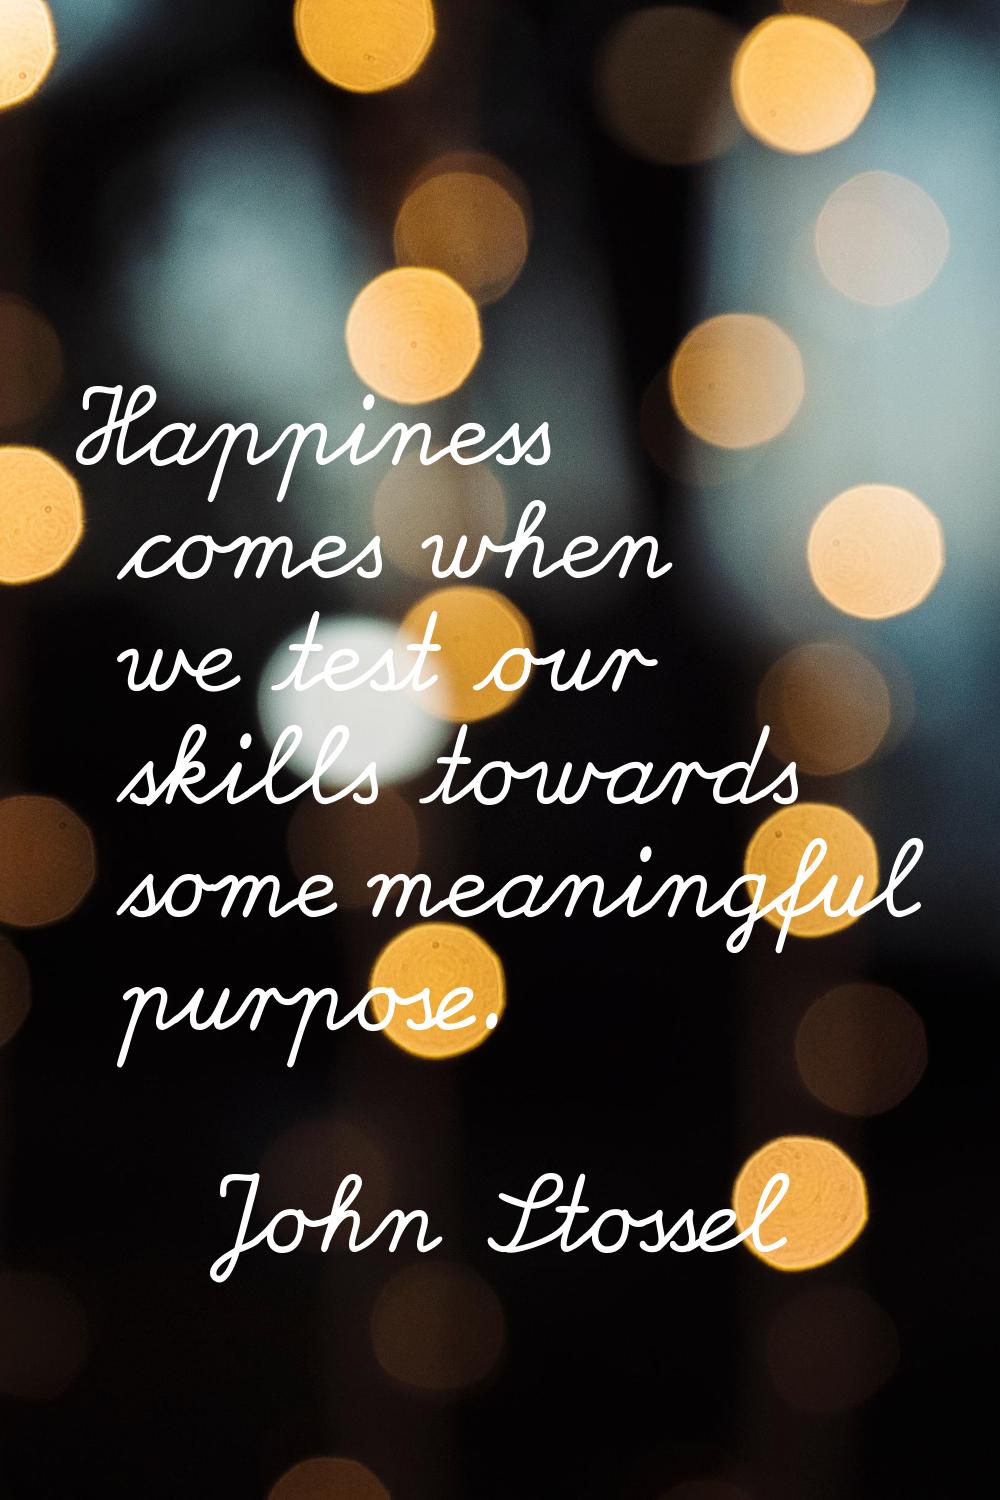 Happiness comes when we test our skills towards some meaningful purpose.